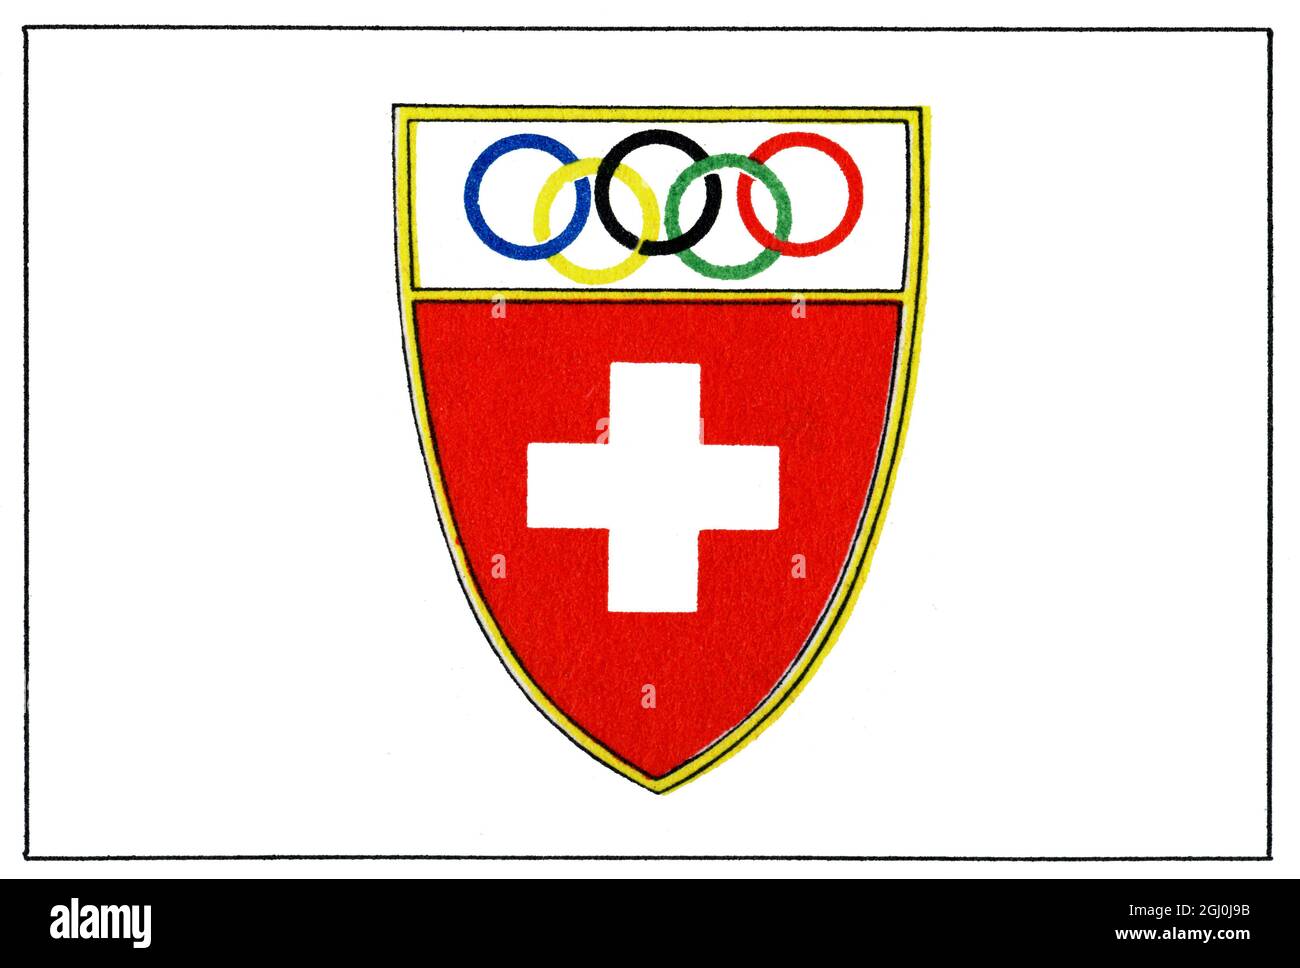 Swiss Olympic Committee - Cour-Lausanne - participated since 1896 ©TopFoto Stock Photo